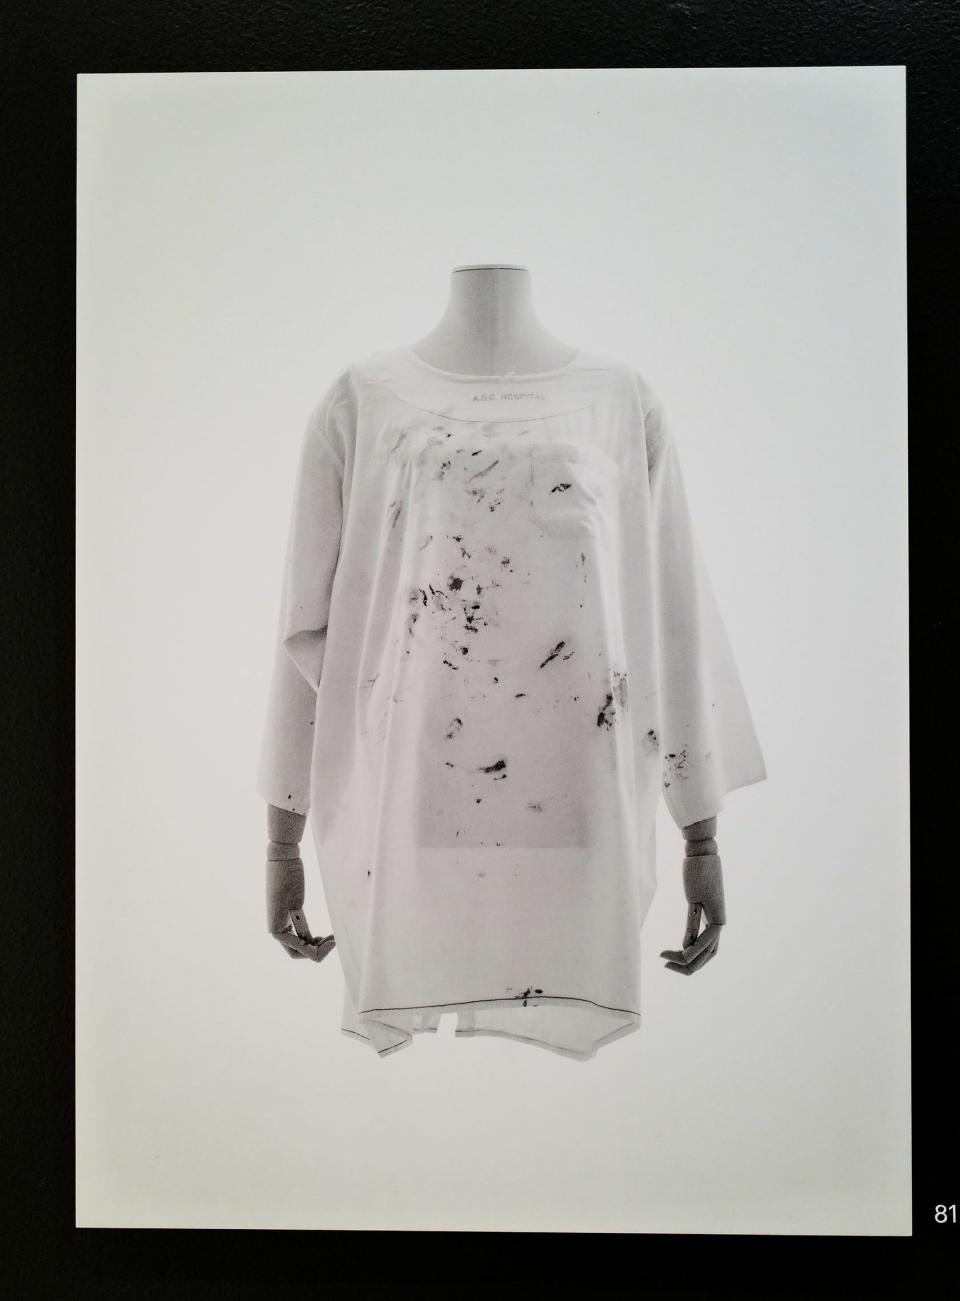 A photograph of the hospital gown worn by Frida Kahlo while recuperating, showing paint brush stains Tuesday, June 21, 2022.